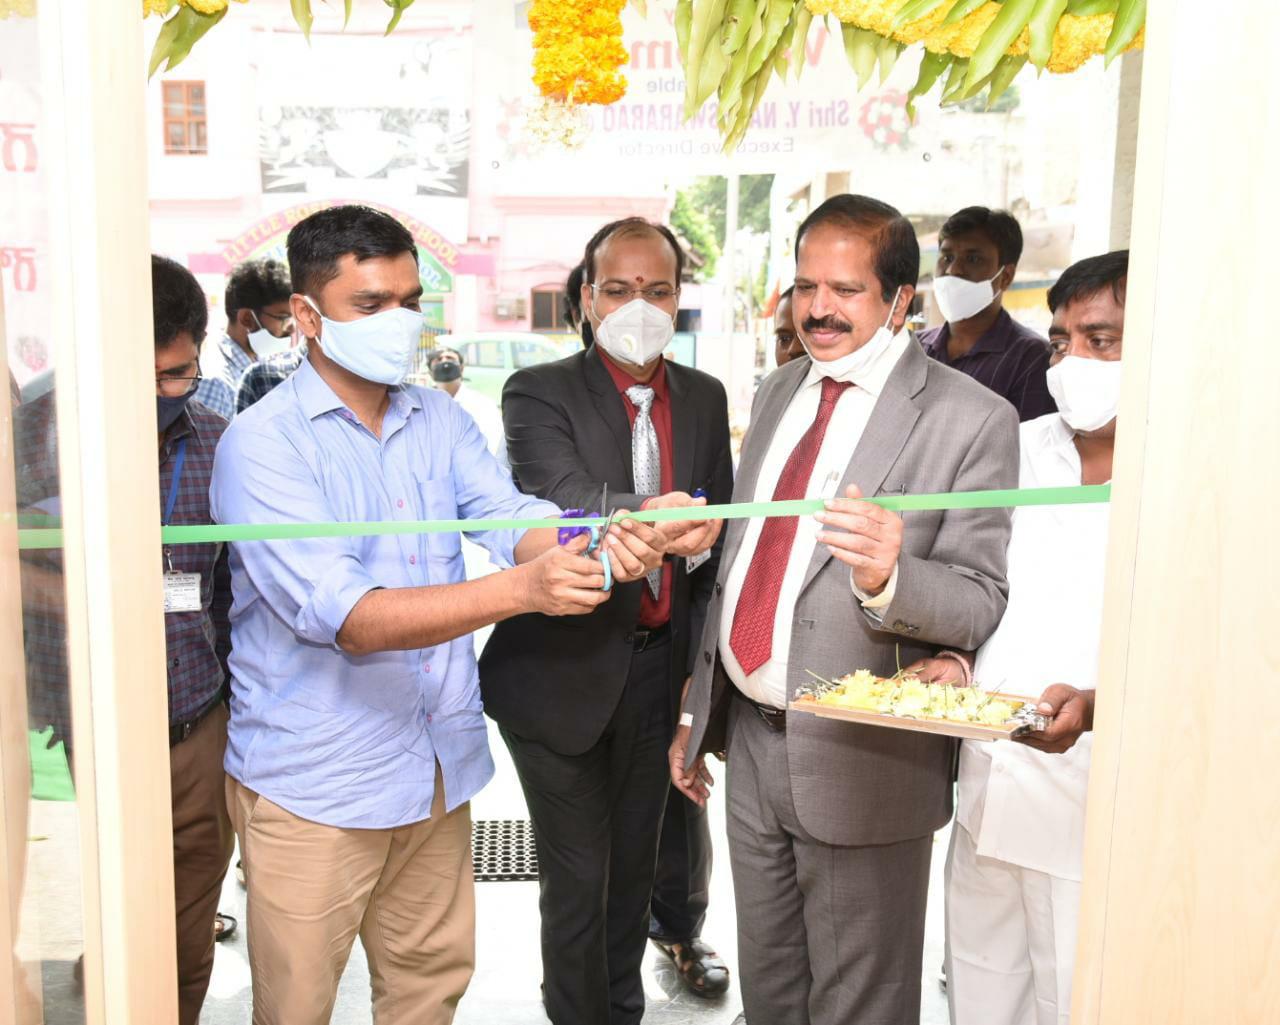 Chief Guest Shri Bharath Gupta, I.A.S. inaugurating Branch in Chittoor District in Andhra Pradesh